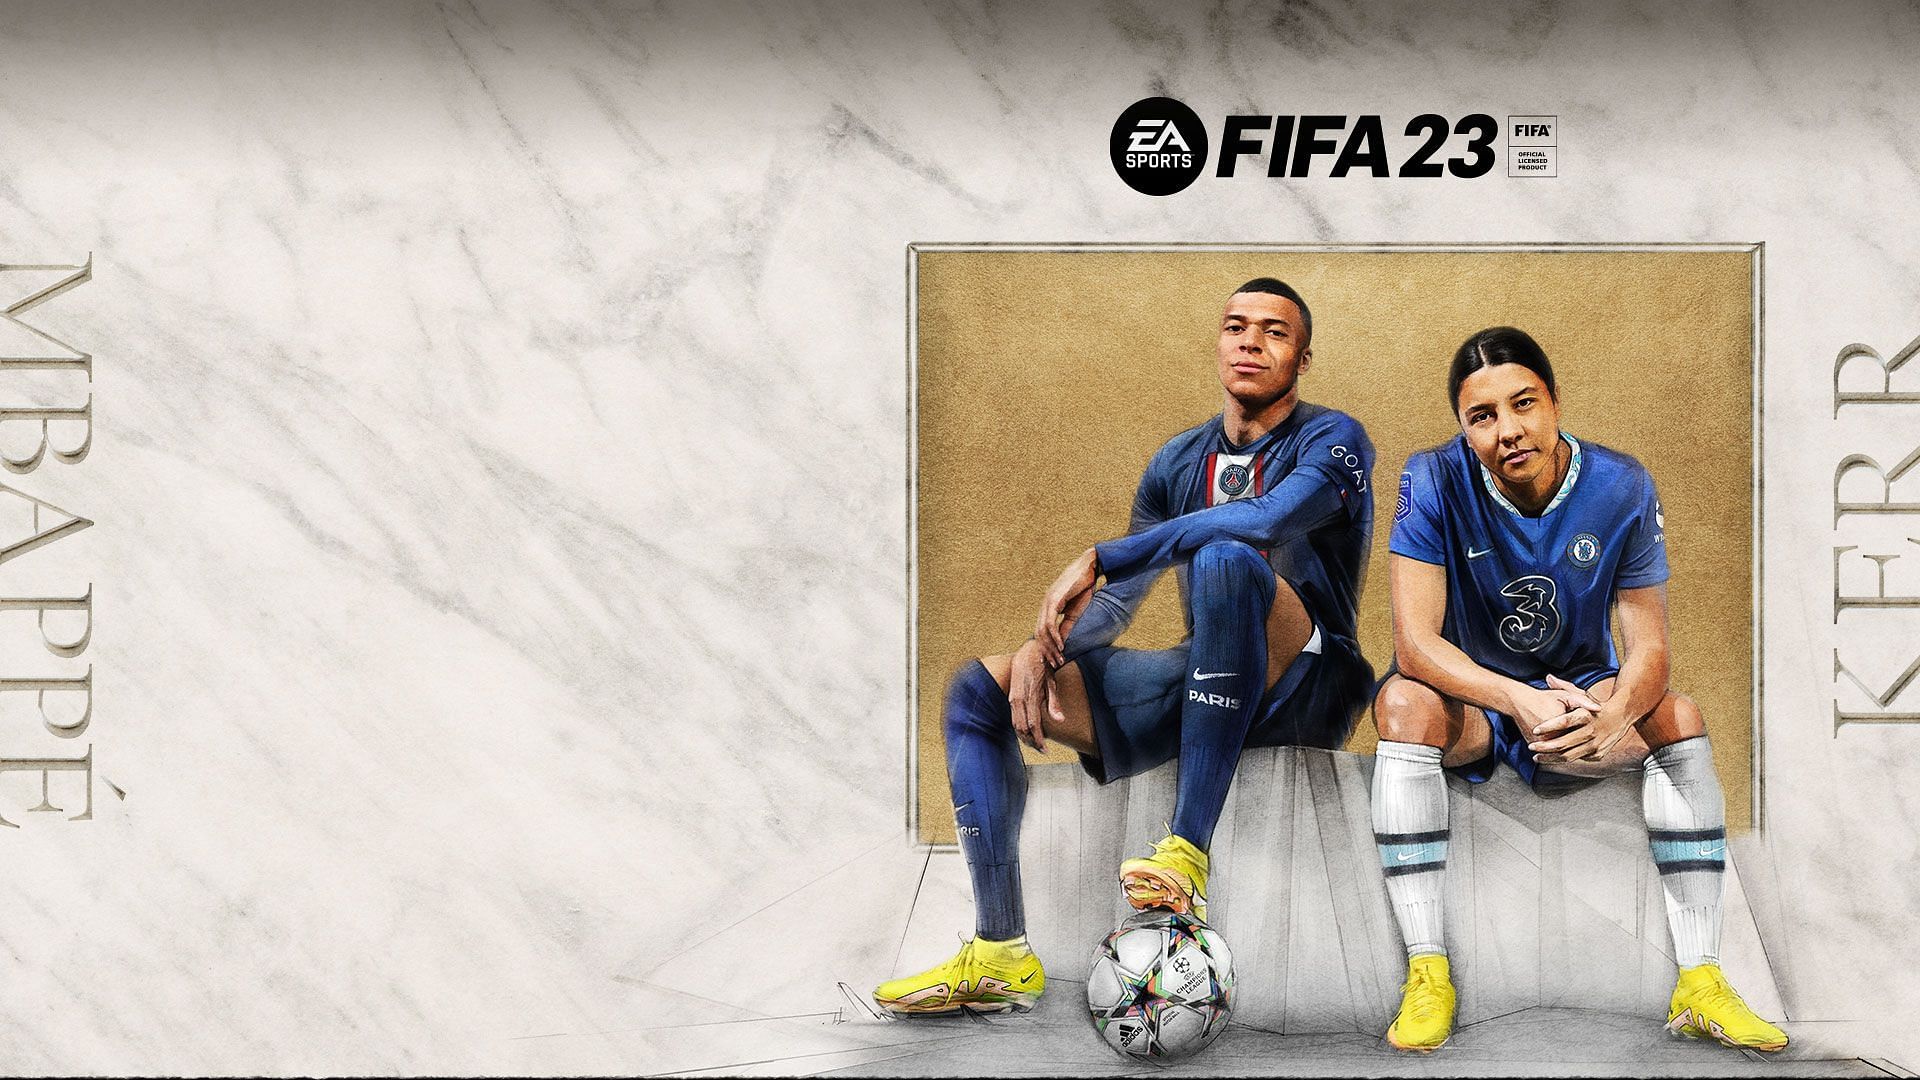 The Ultimate Edition comes with an early access period (Image via EA Sports)